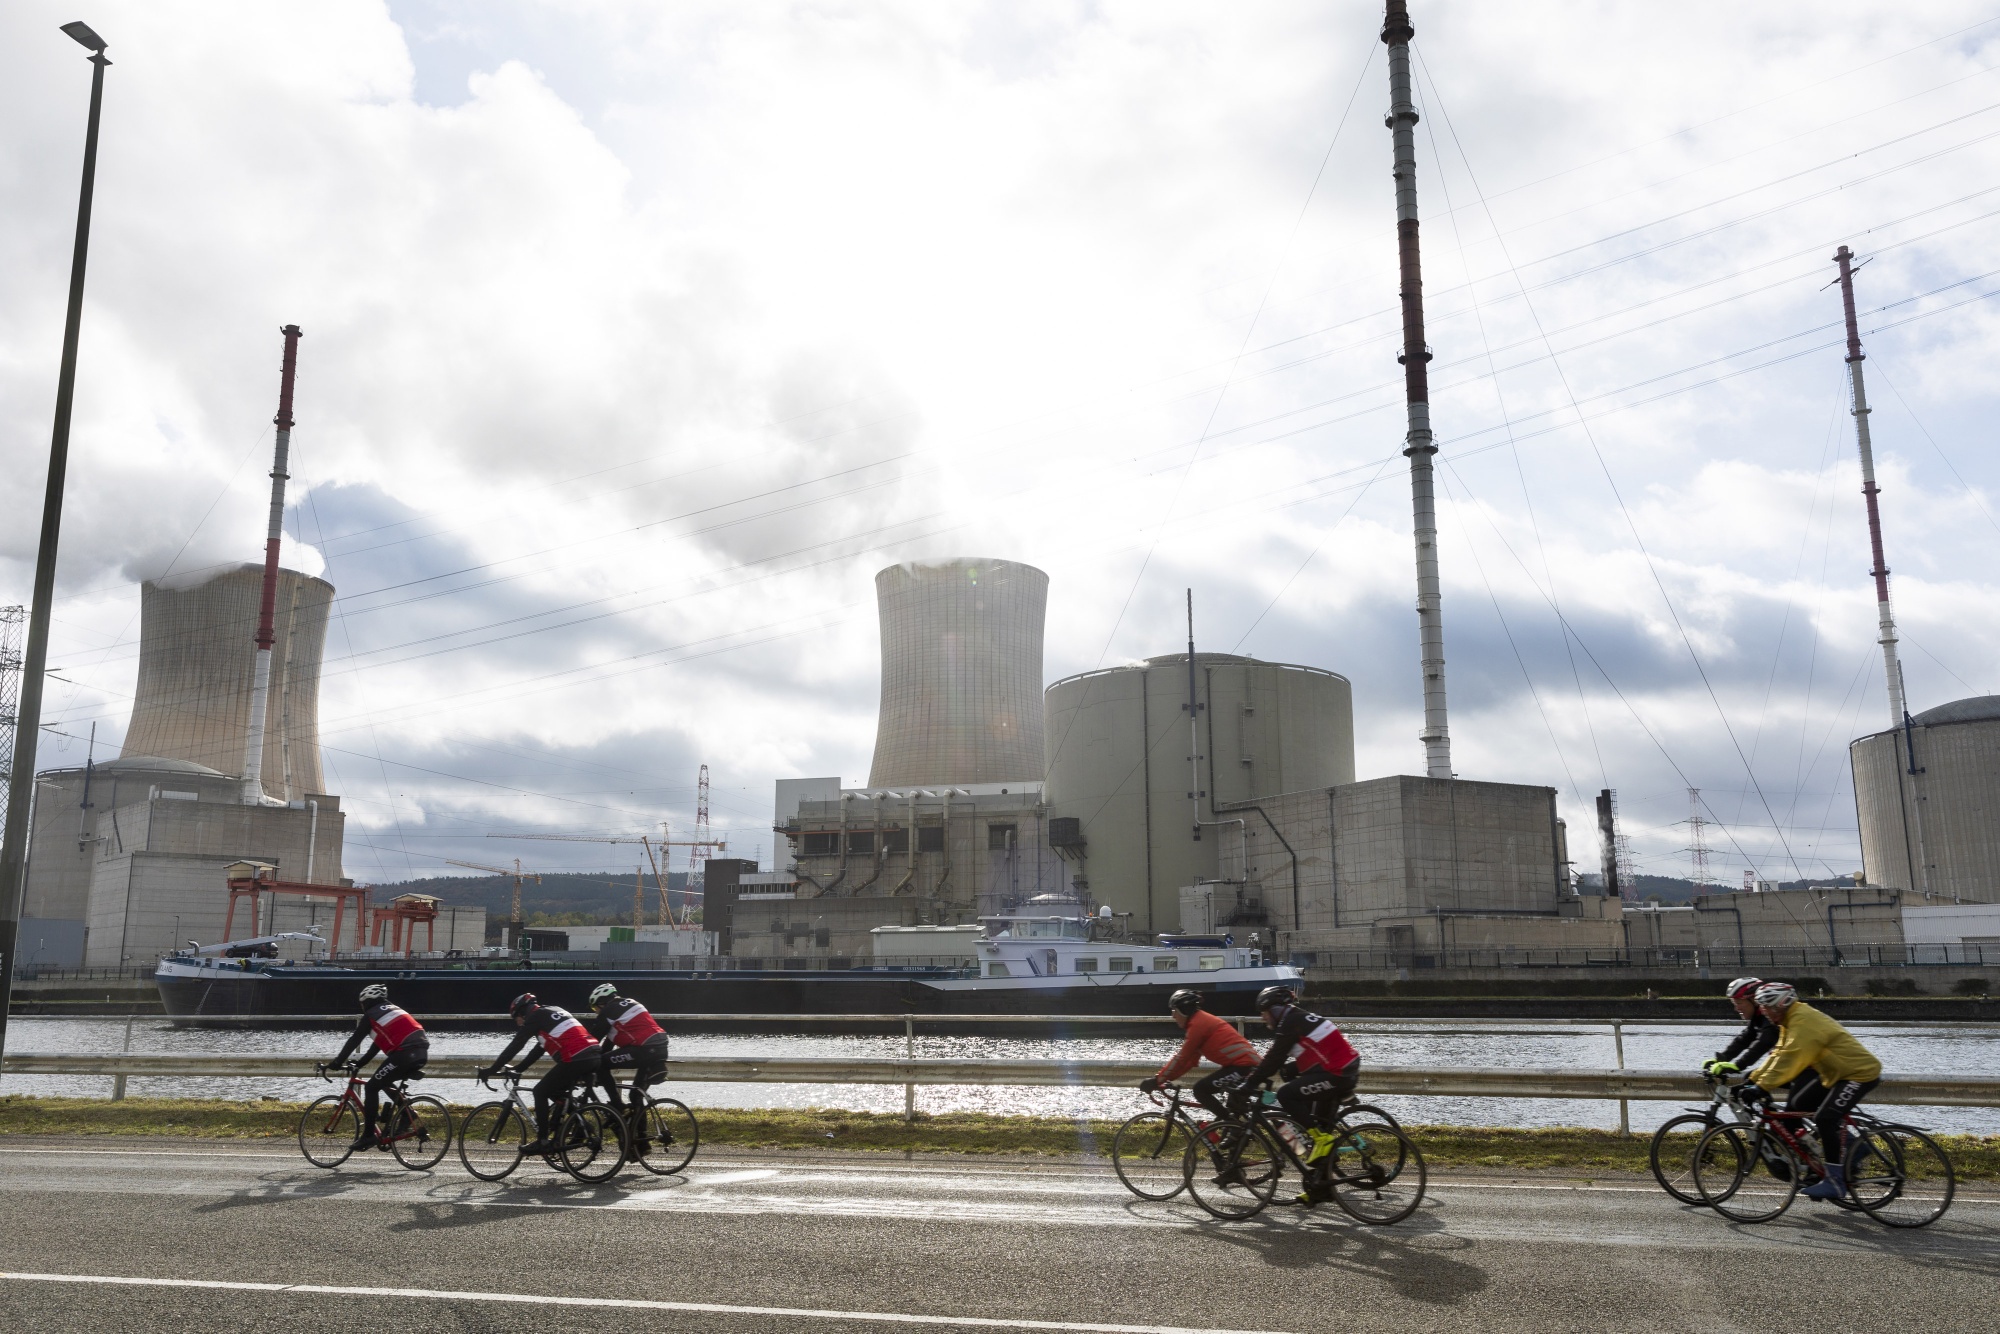 Nuclear power station in Tihange, Belgium. Atomic energy supplies almost half&nbsp;the country’s electricity.